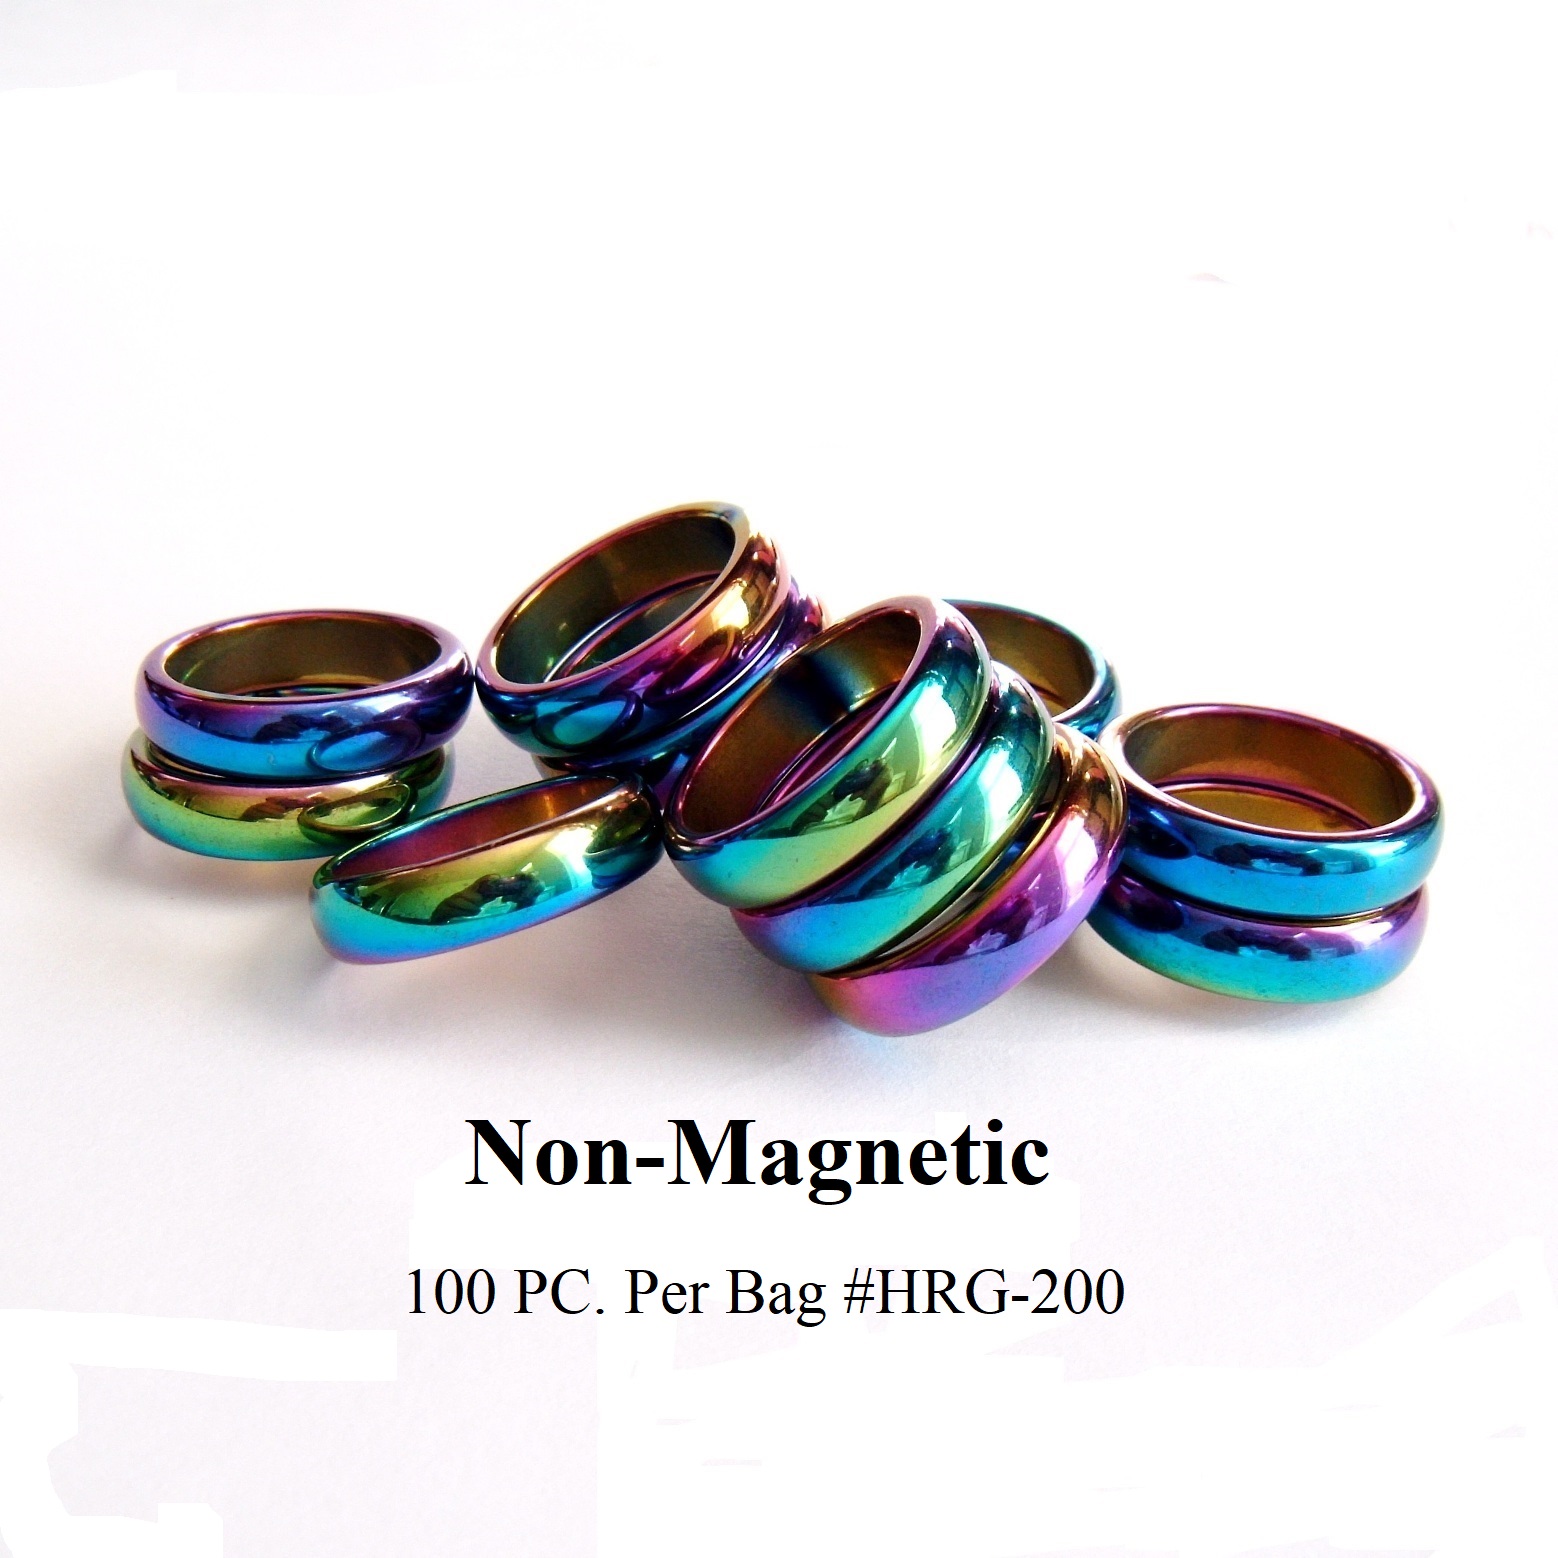 100 PC. Per Bag 6mm Rainbow Smooth Dome Top Rings (Non-Magnetic) #HRG200